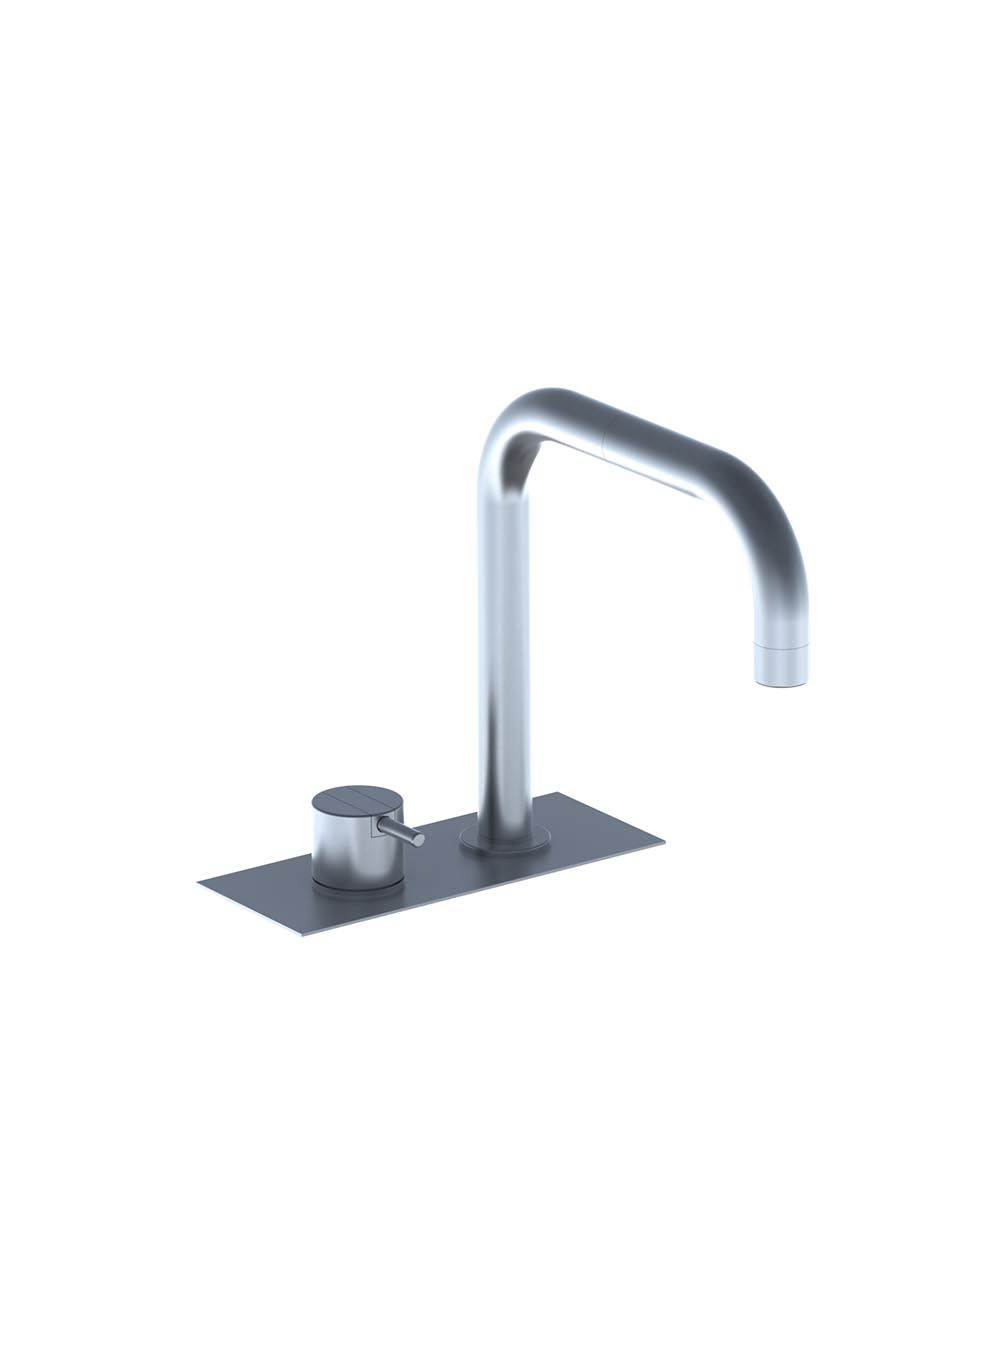 BK5: One-handle mixer with double swivel spout for bath filling. Complete with adjustable bracket and wat